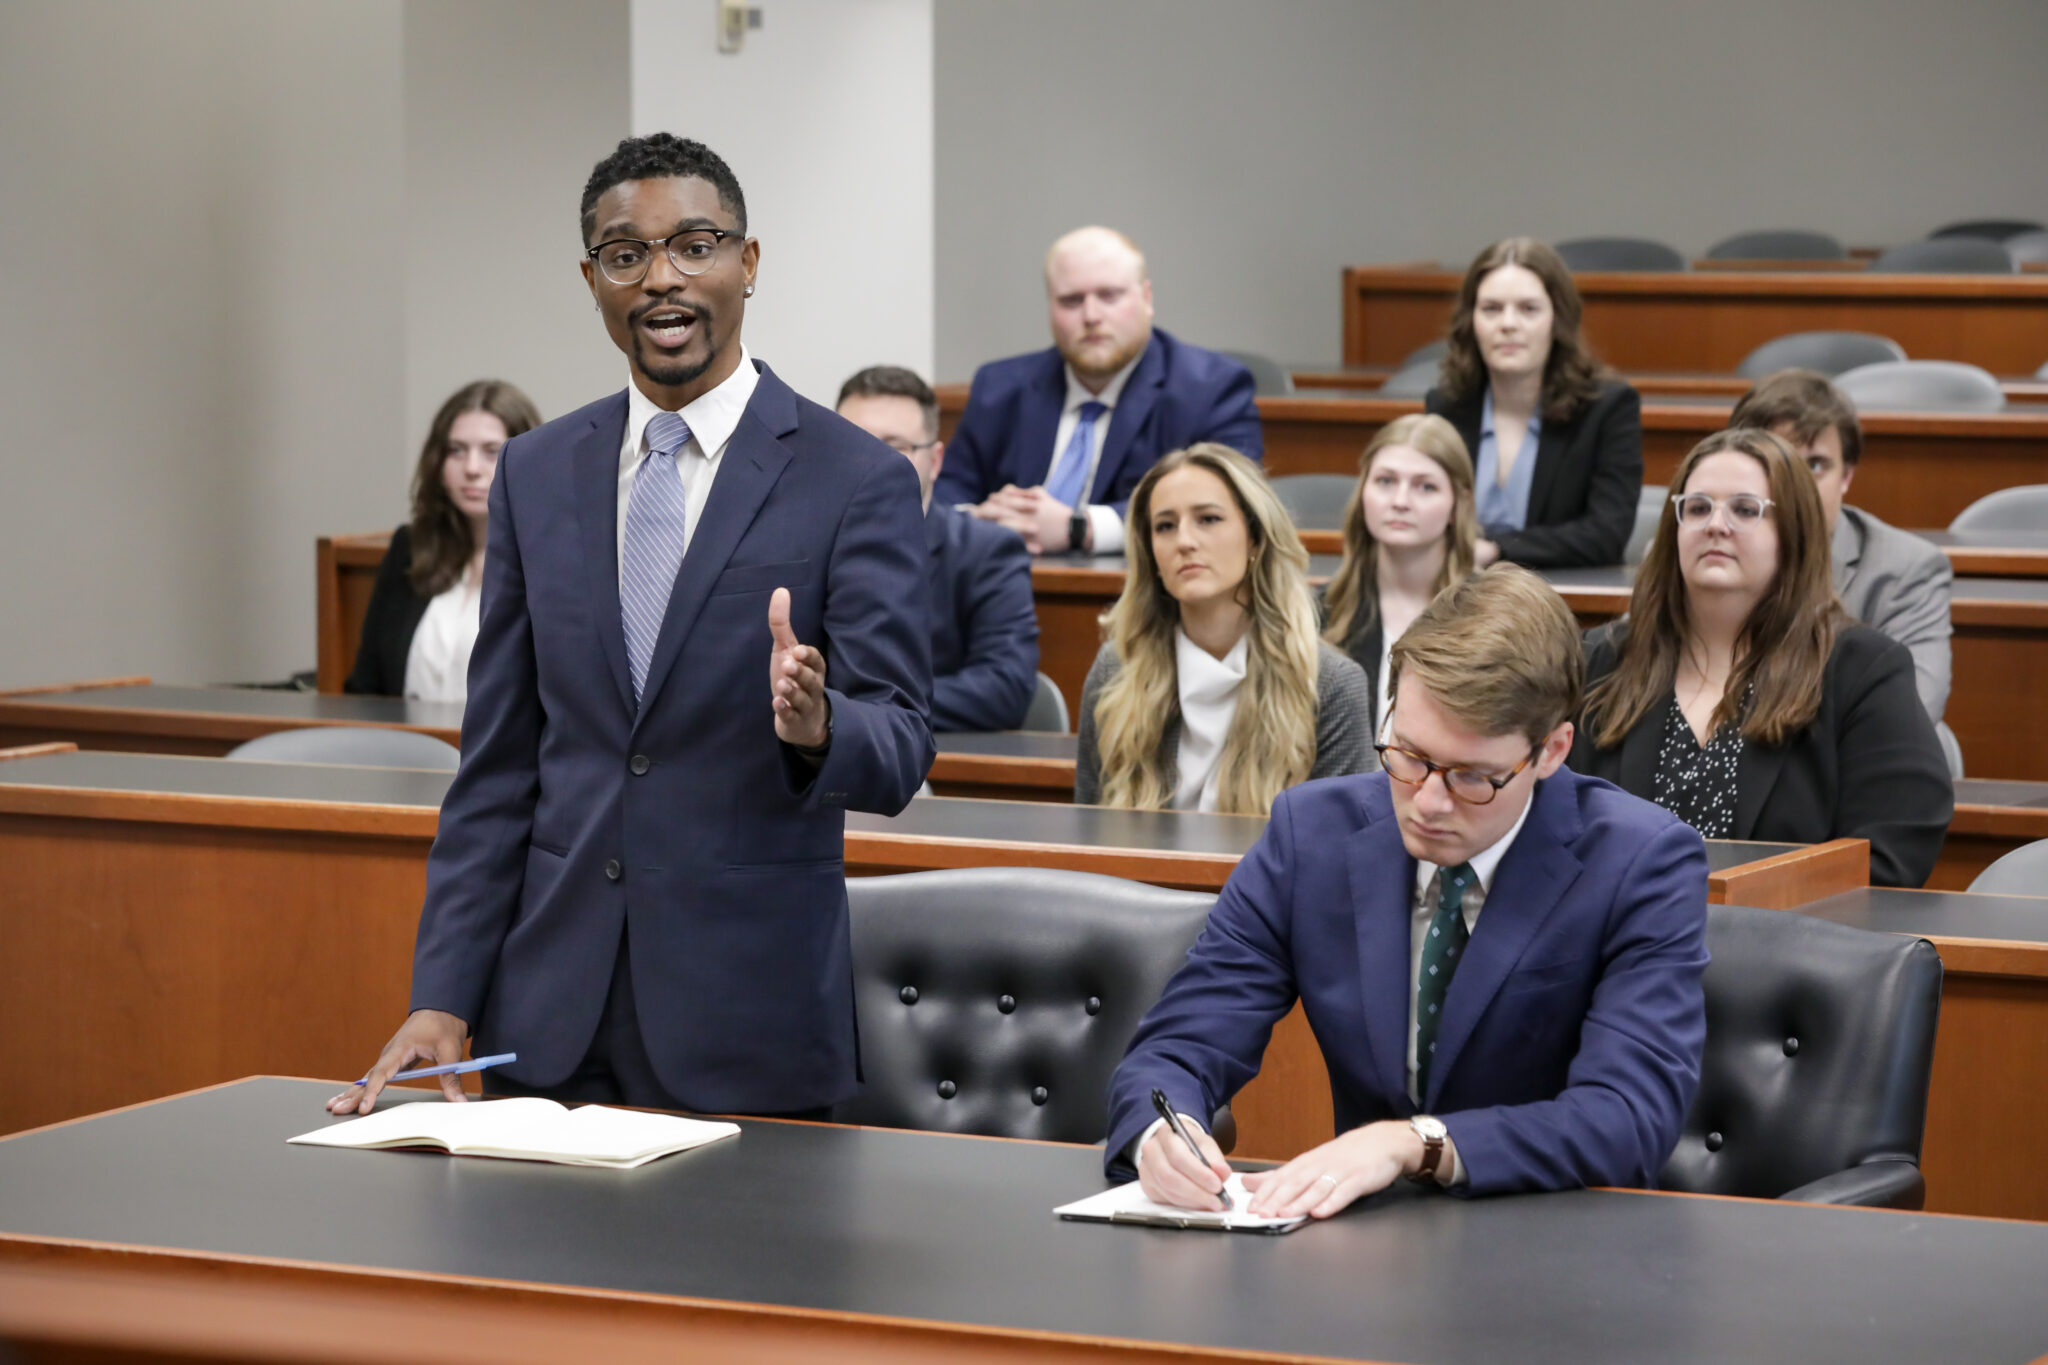 Students participating in a mock trial argument